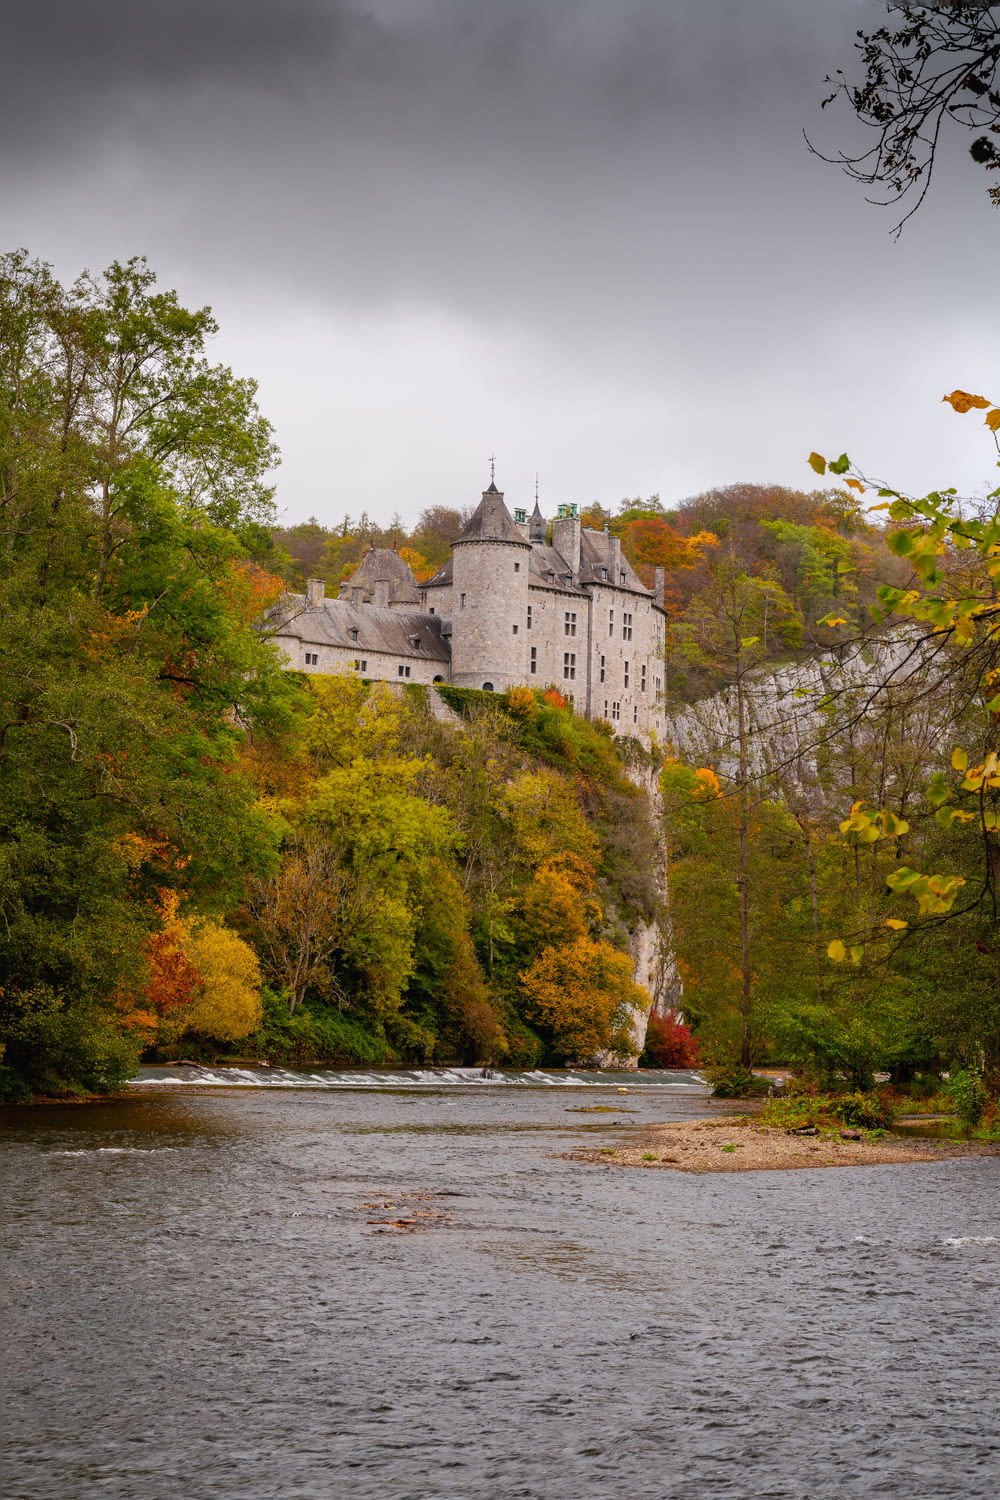 white and gray castle on green trees beside river during daytime